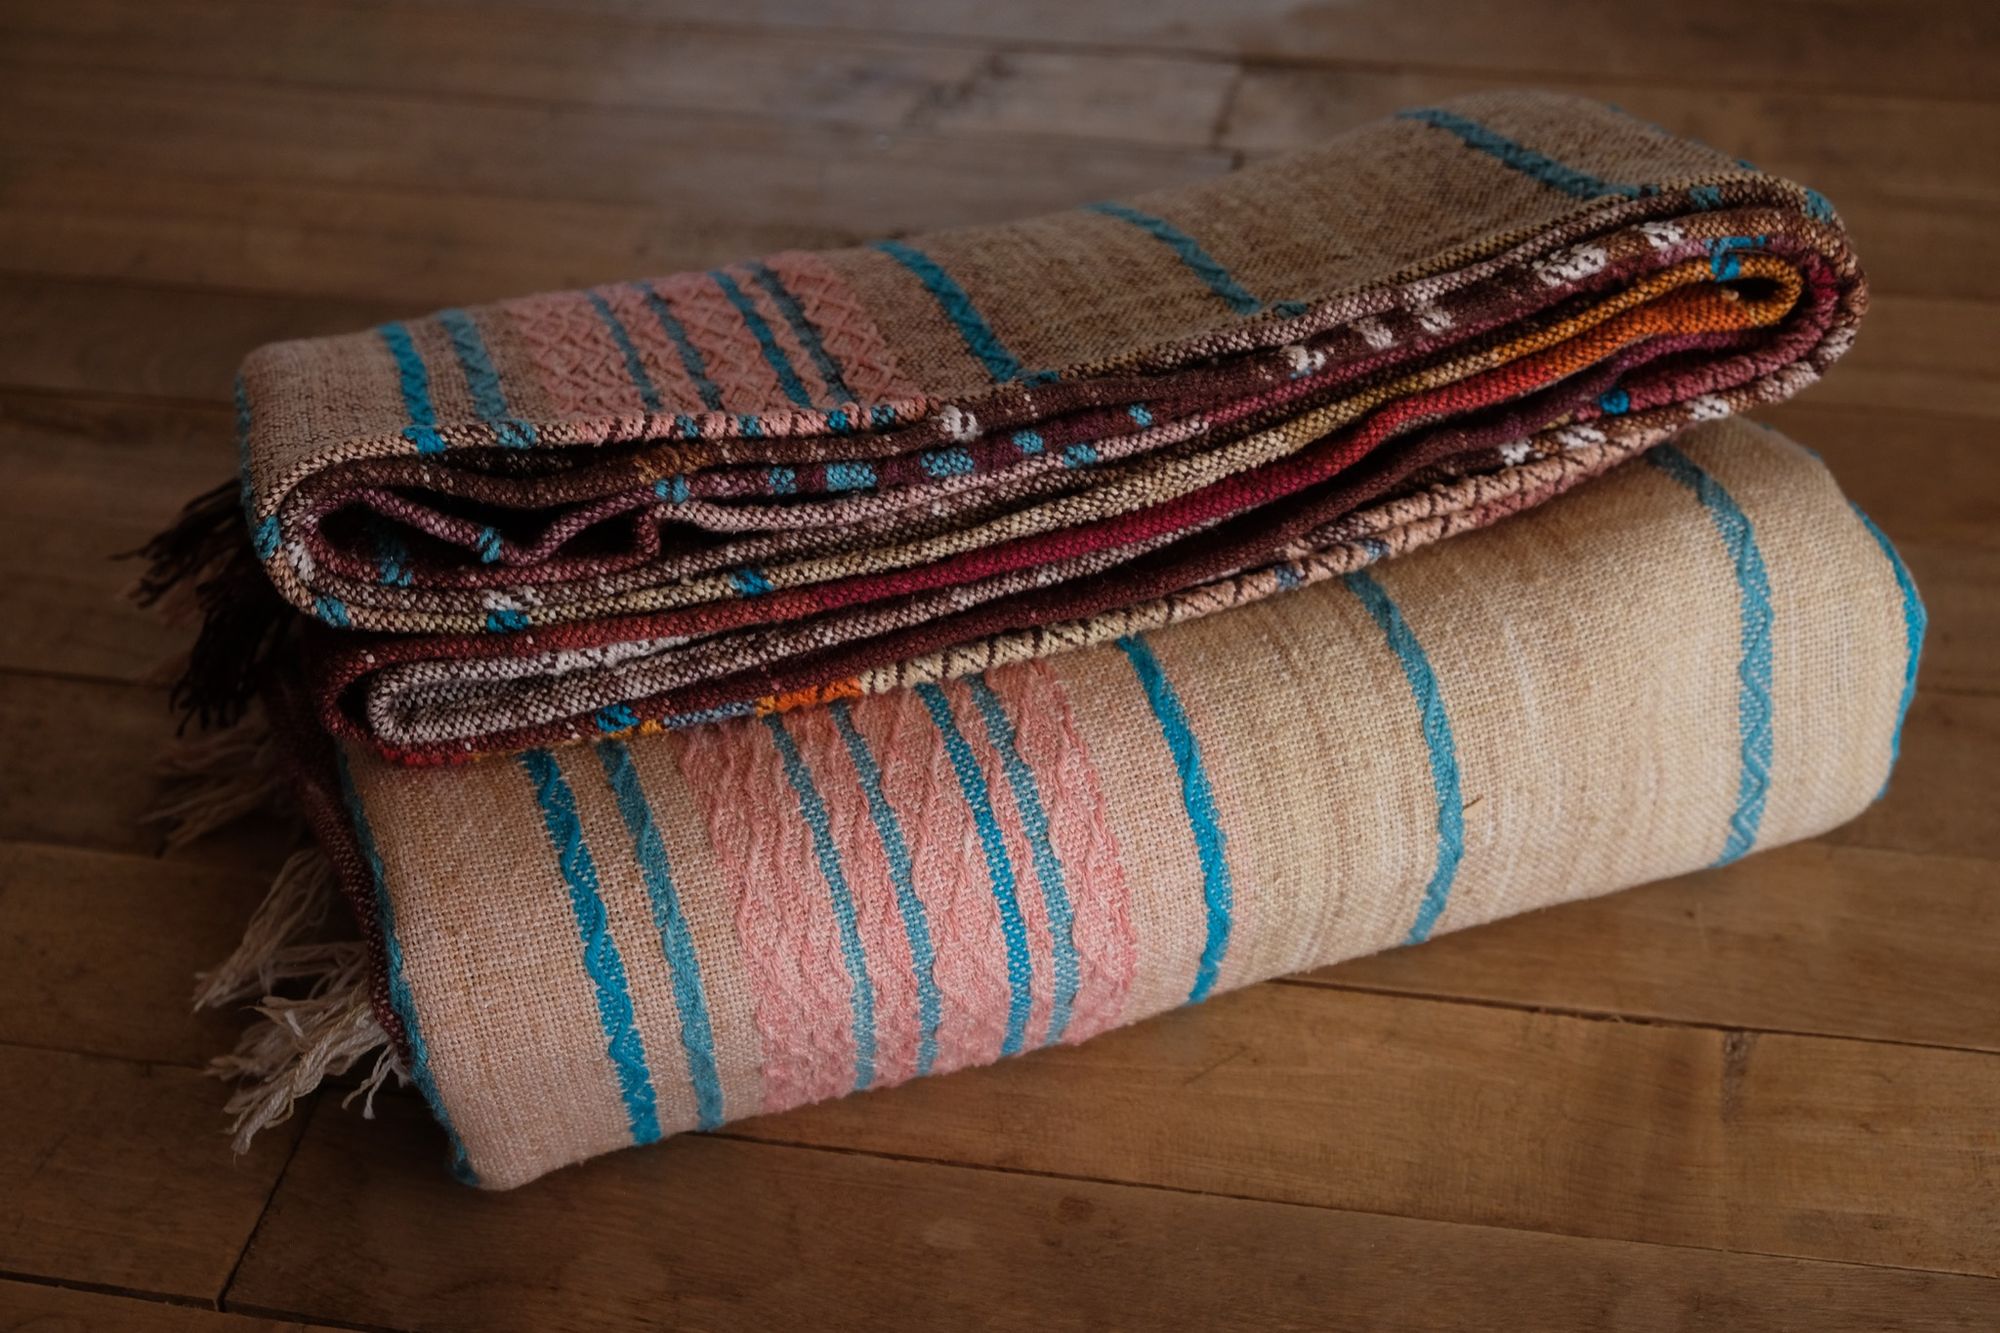 Handwoven fabric with a diamond texture pattern in natural browns, grey, purples, reds, turquoise, yellow, orange and pink. It is folded on a wooden floor.